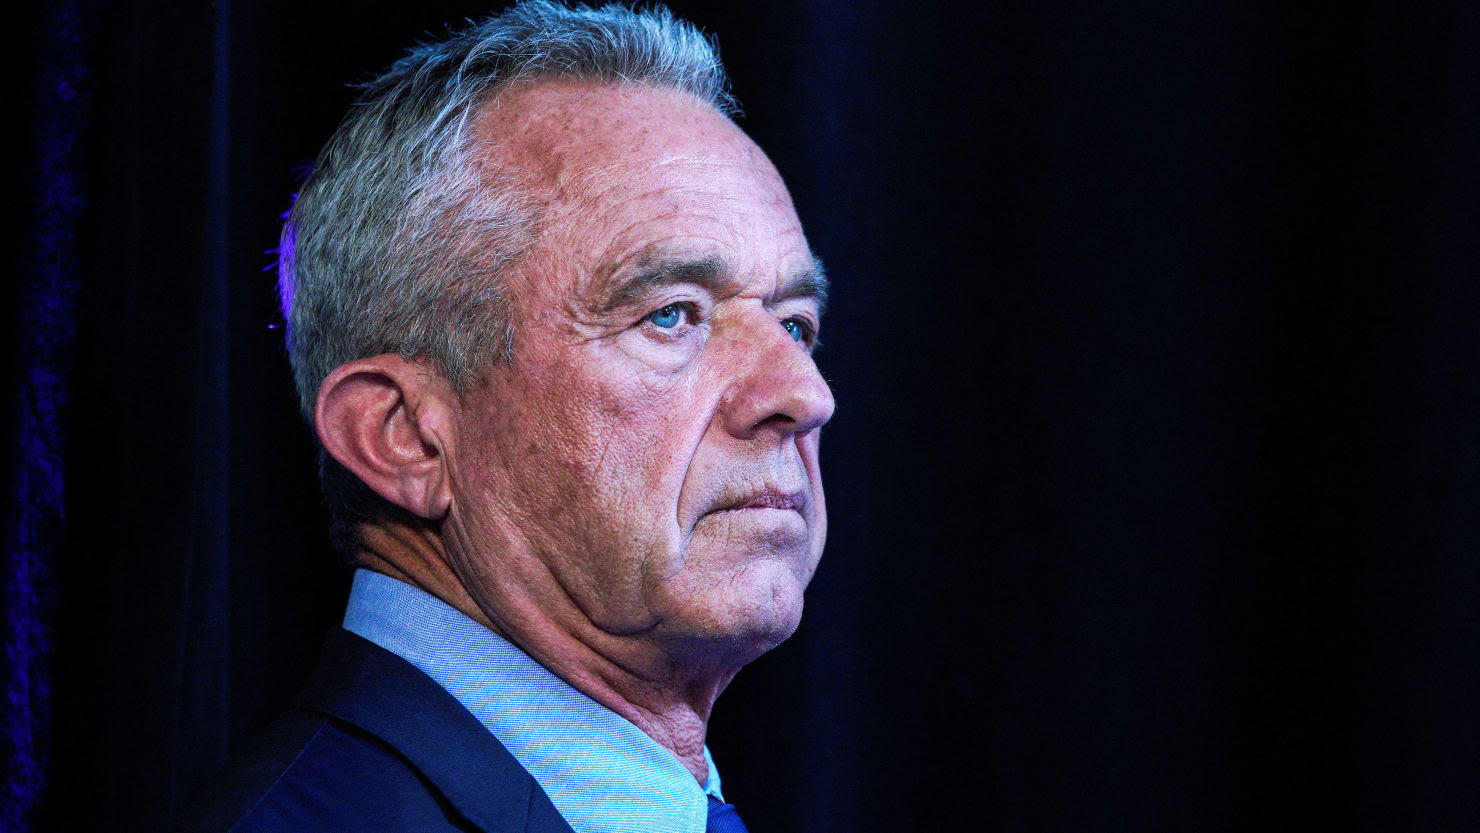 Top RFK Jr. Operative Allegedly Choked Woman in NYC: Report